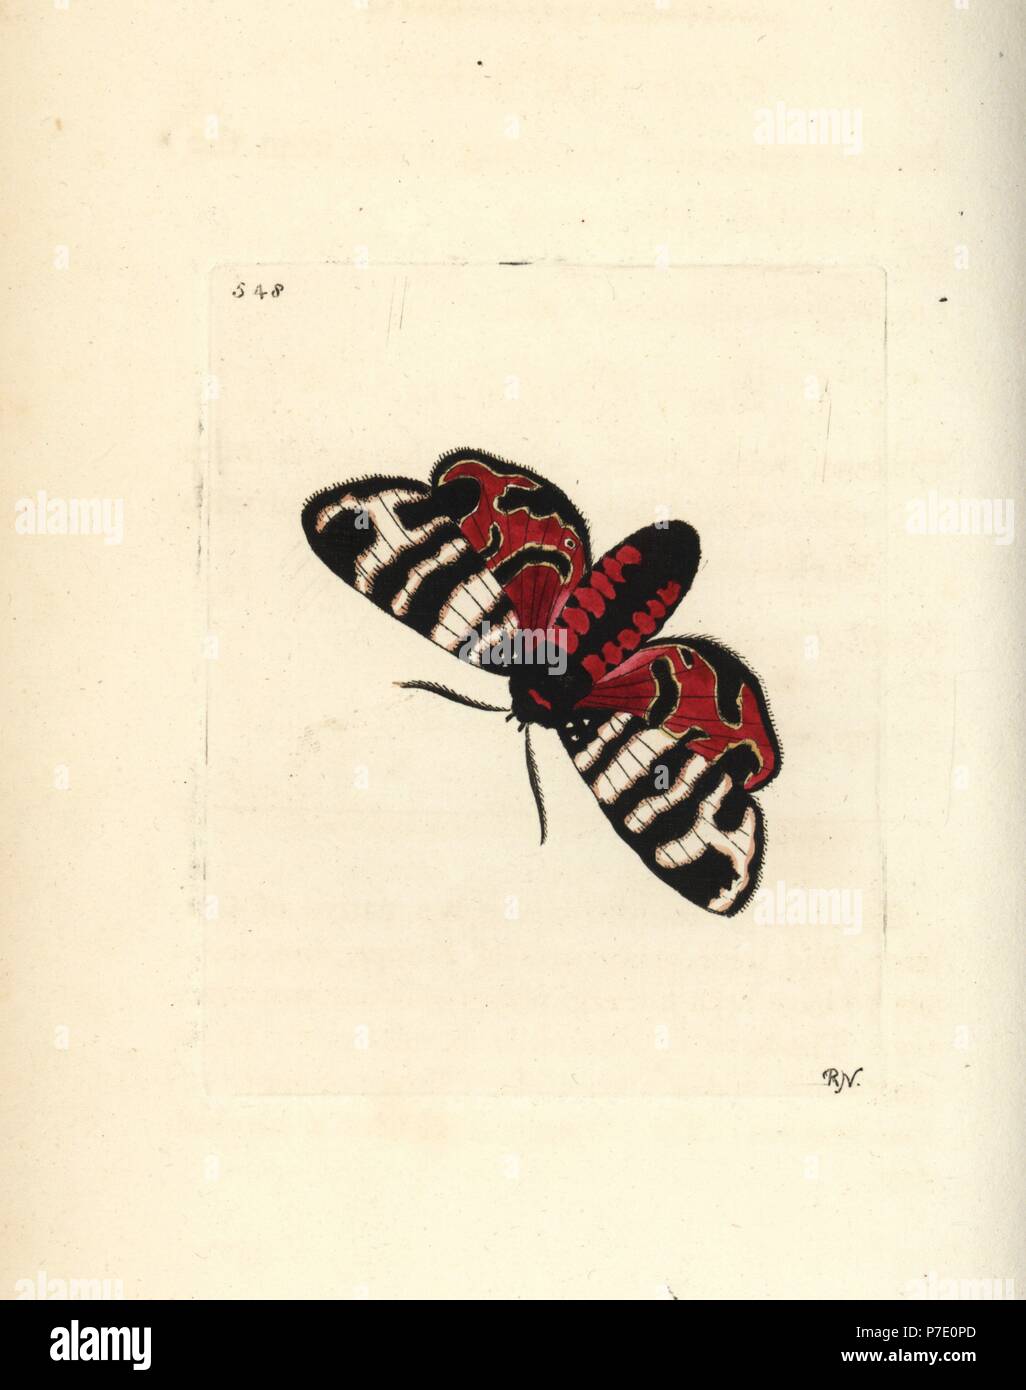 Hebe tiger moth, Eucharia festiva (Hebe moth, Phalaena hebe). Illustration drawn and engraved by Richard Polydore Nodder. Handcoloured copperplate engraving from George Shaw and Frederick Nodder's The Naturalist's Miscellany, London, 1802. Stock Photo